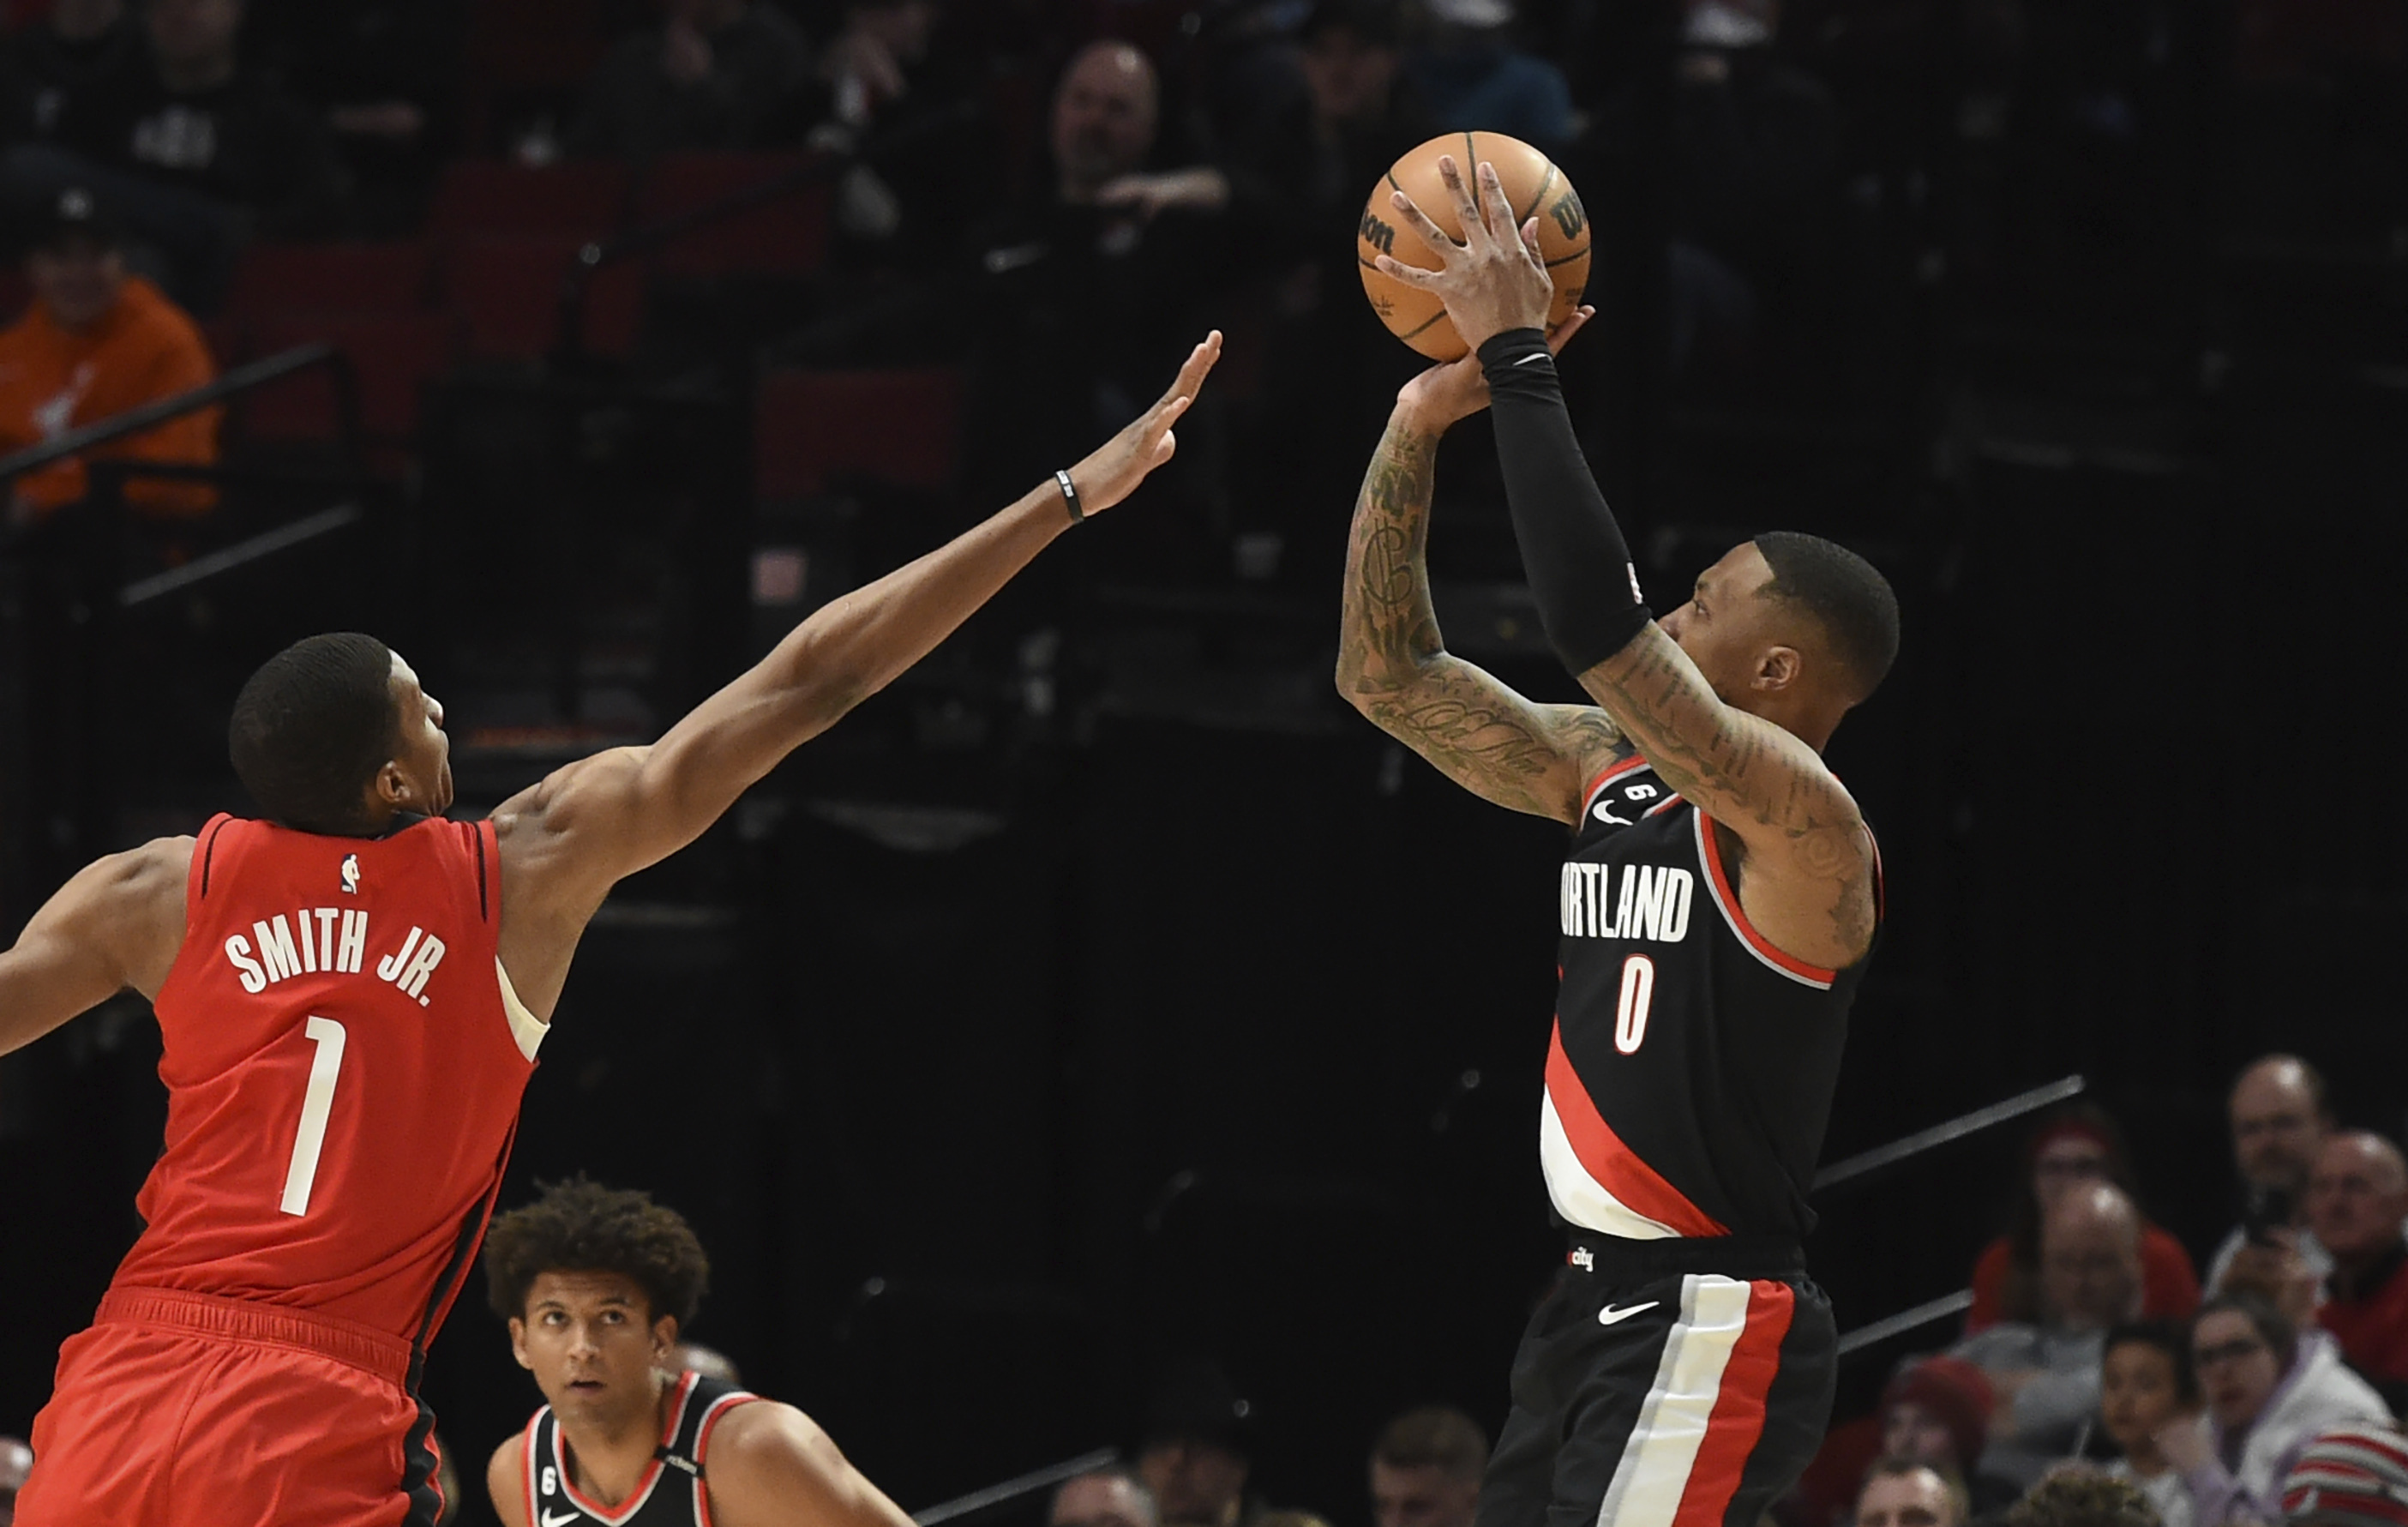 Damian Lillard equals career-high 61 points to lift Portland Trail Blazers  into eighth place in Western Conference, NBA News